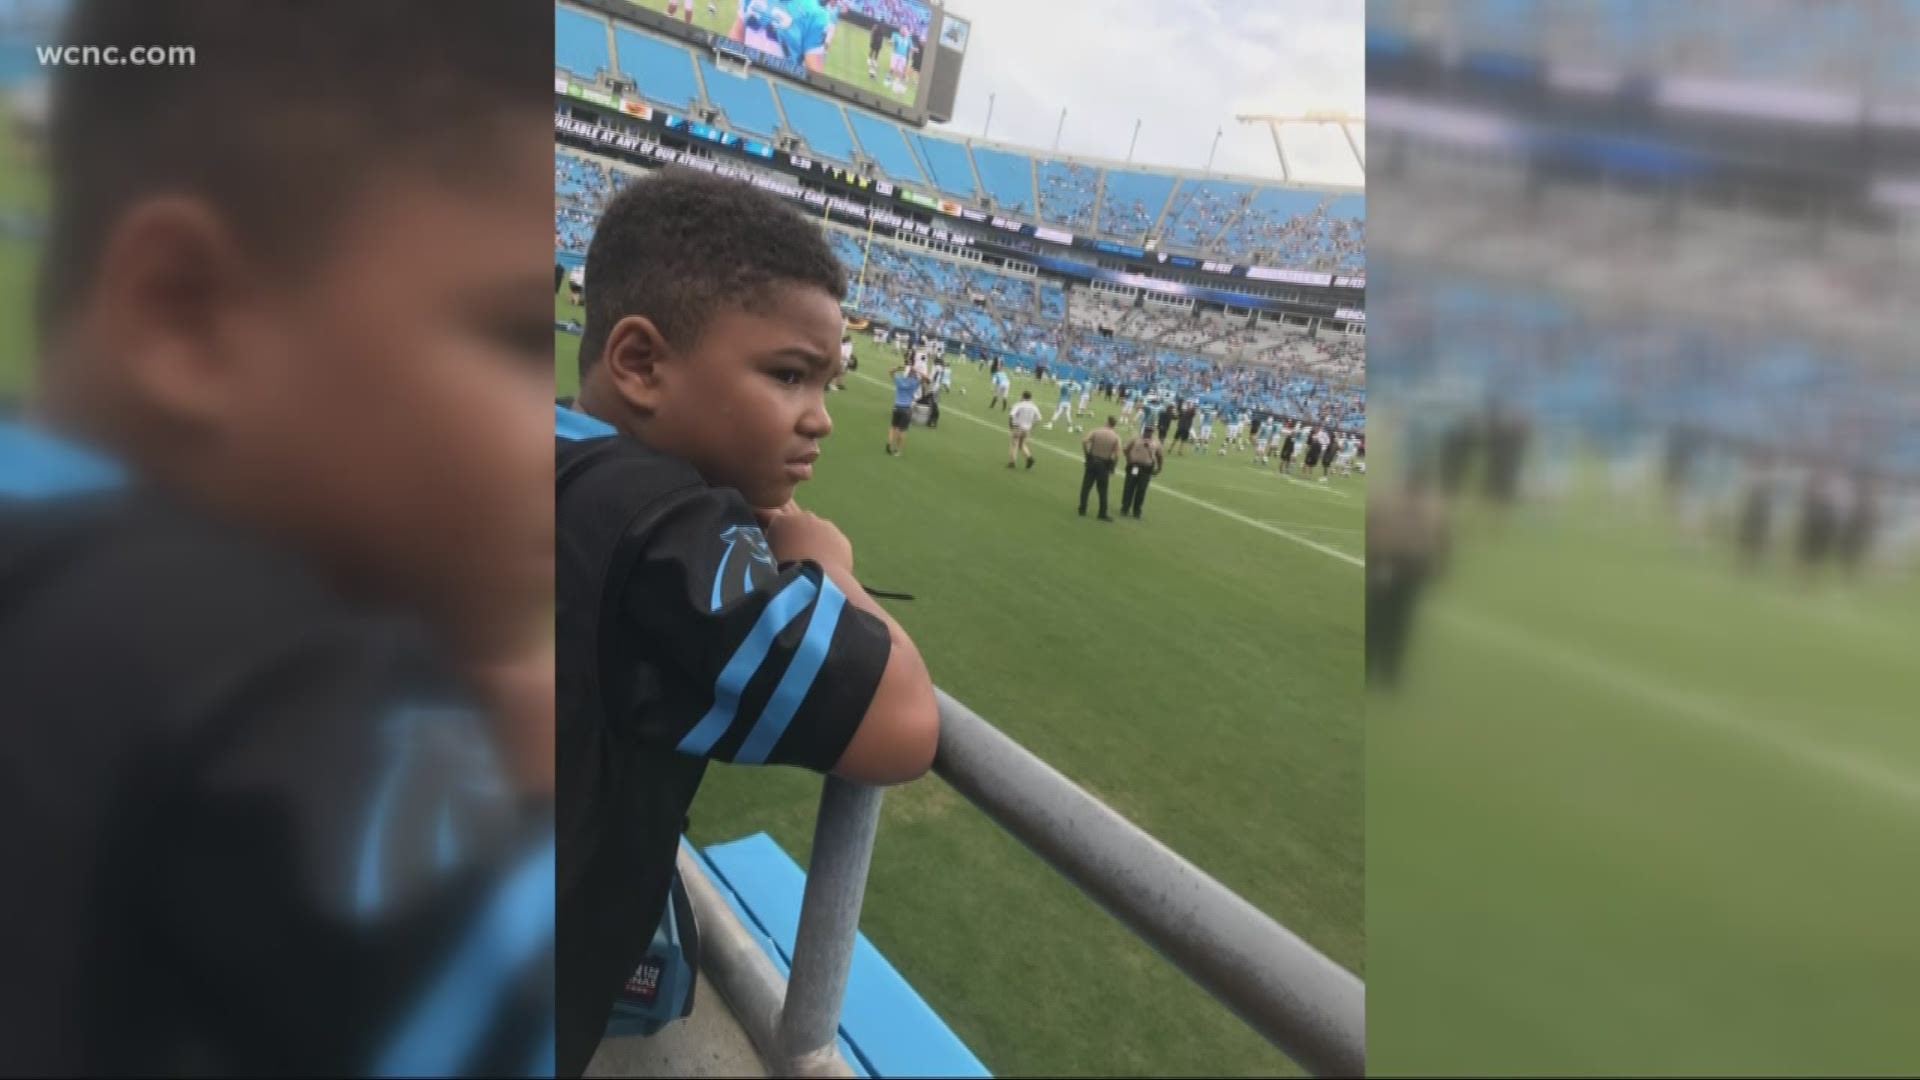 Search is over for Panthers fan who was kind to kids